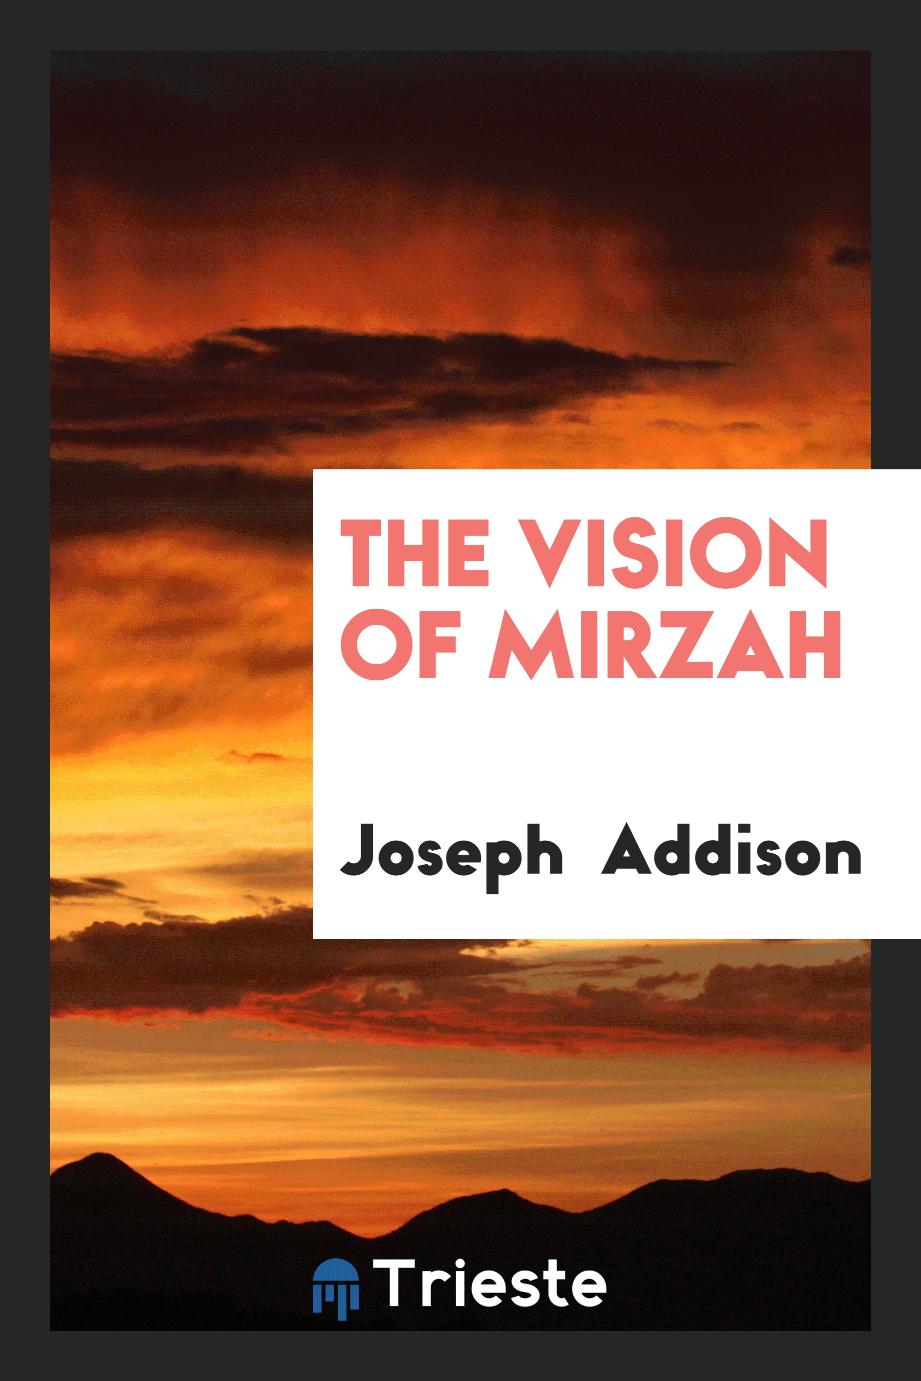 The Vision of Mirzah